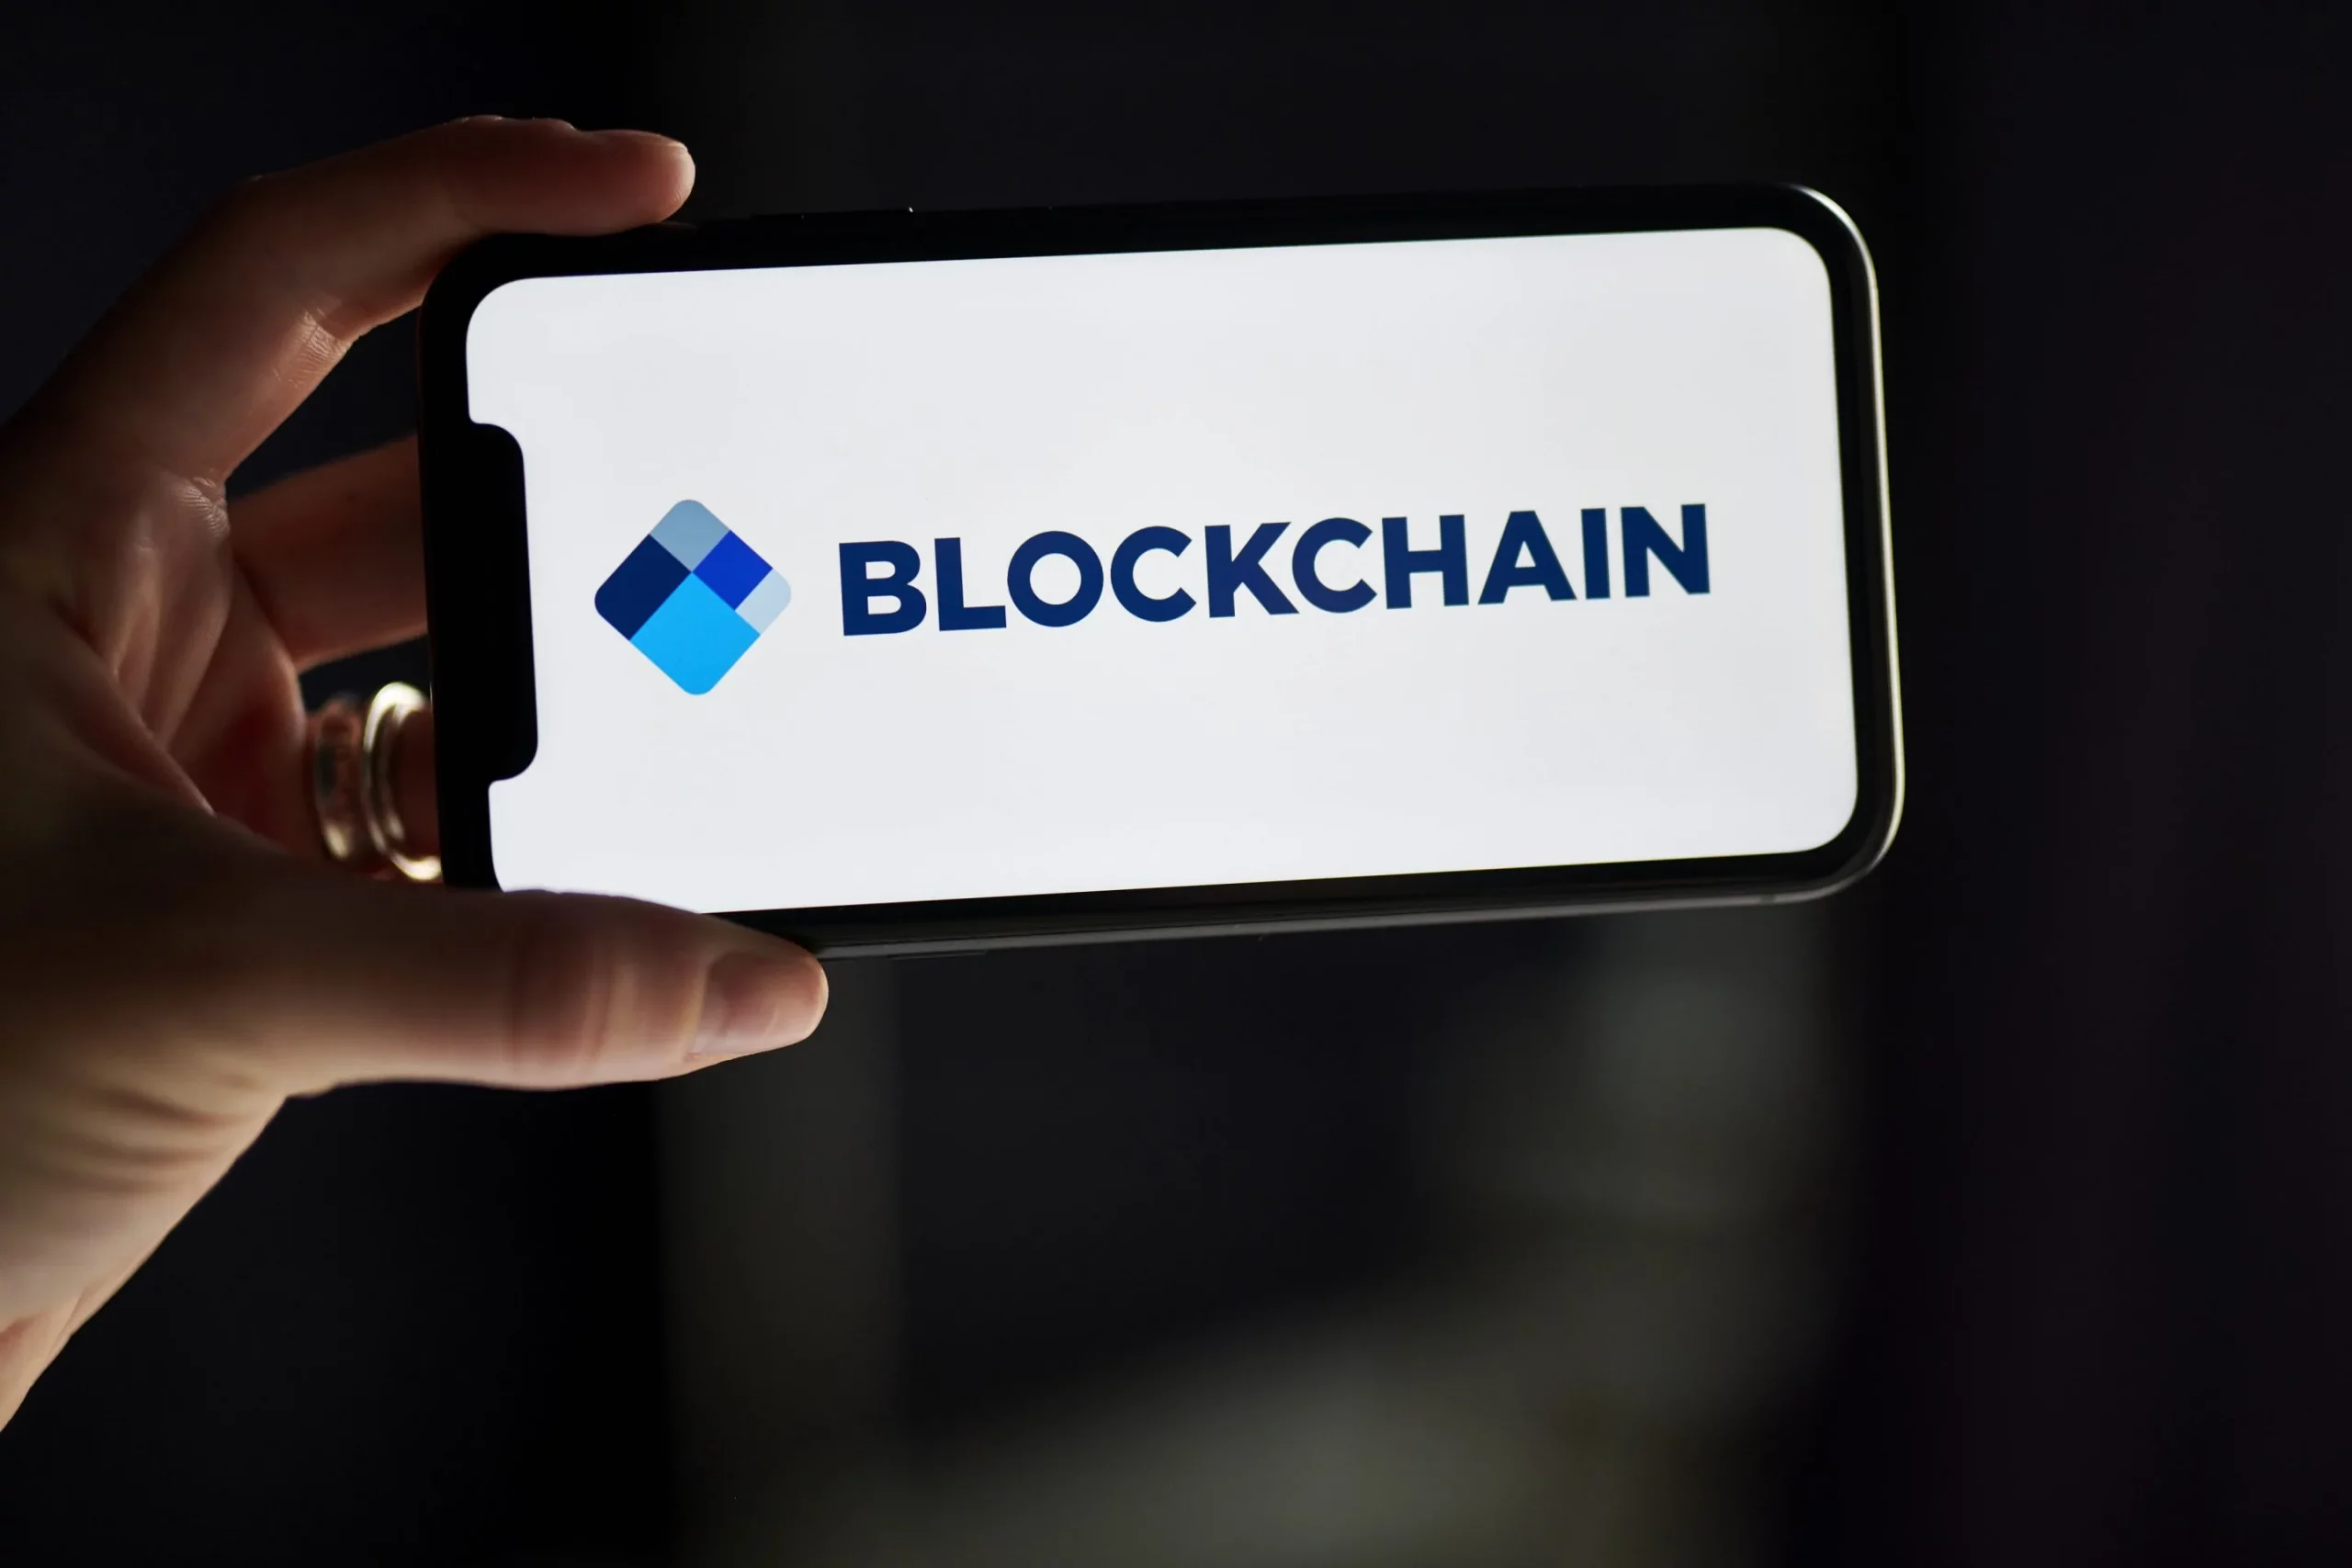 Blockchain.com Receives Principle Approval To Operate in Singapore